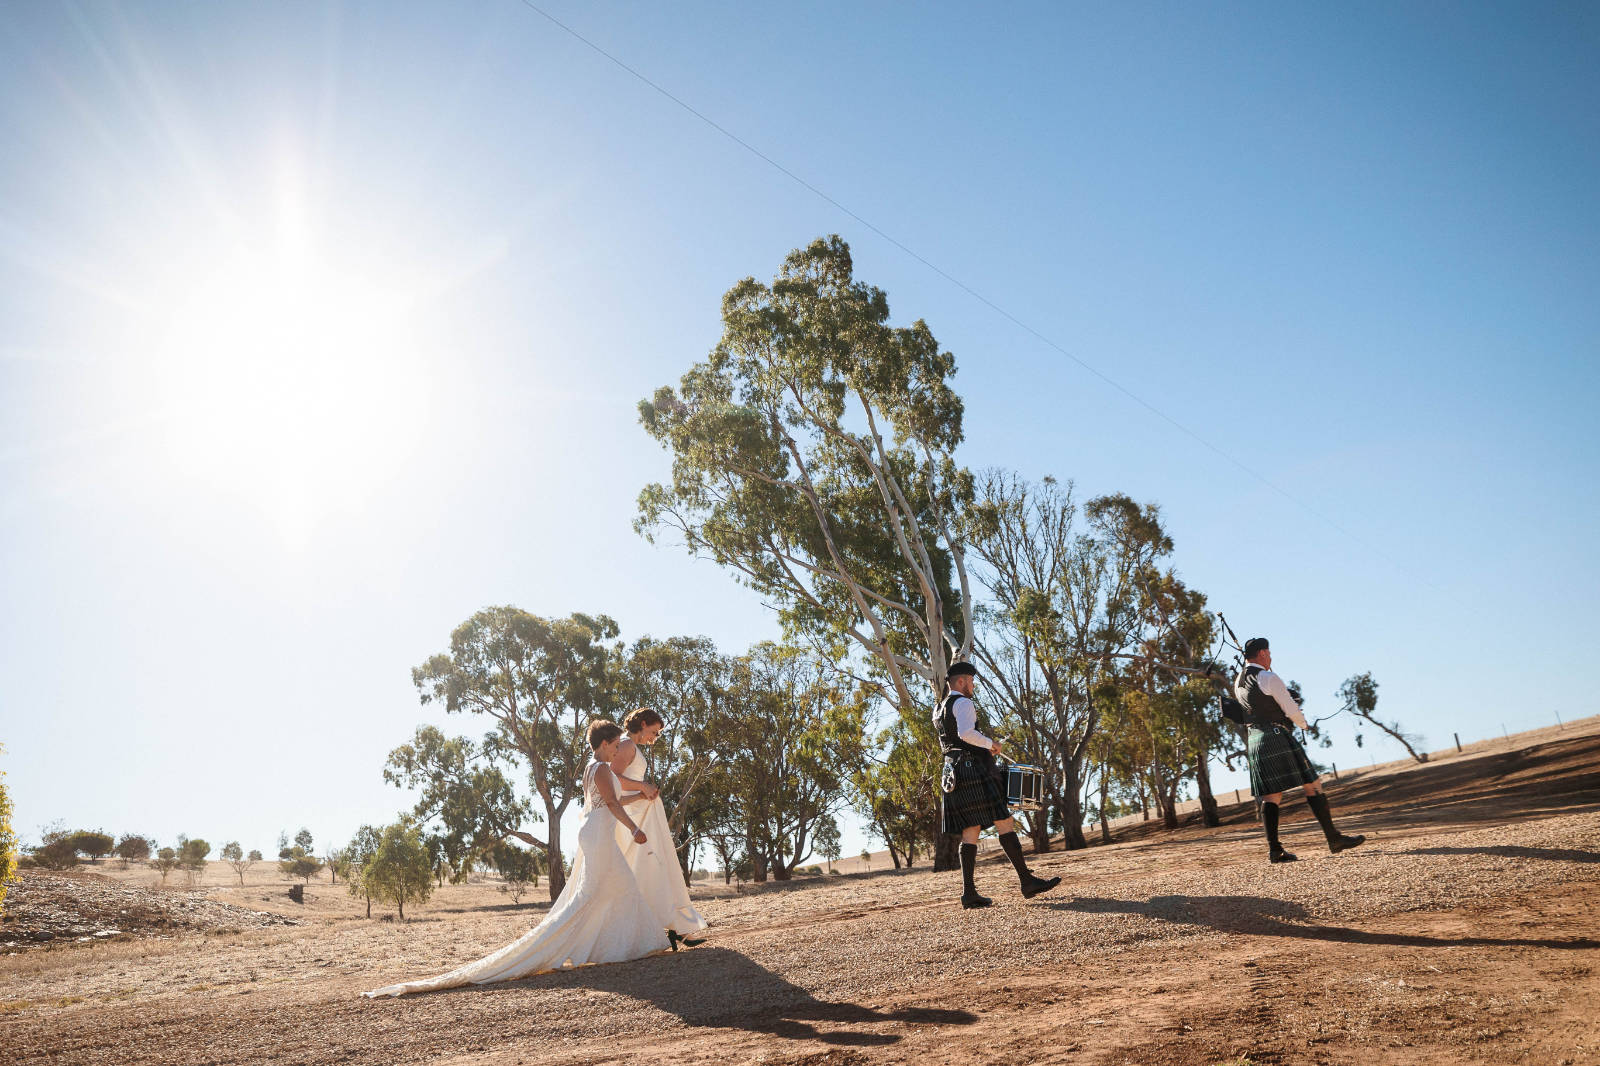 Luxury Barossa Valley wedding for Firlie and Raegan at The Kingsford Barossa. Photos by James Field Photography.